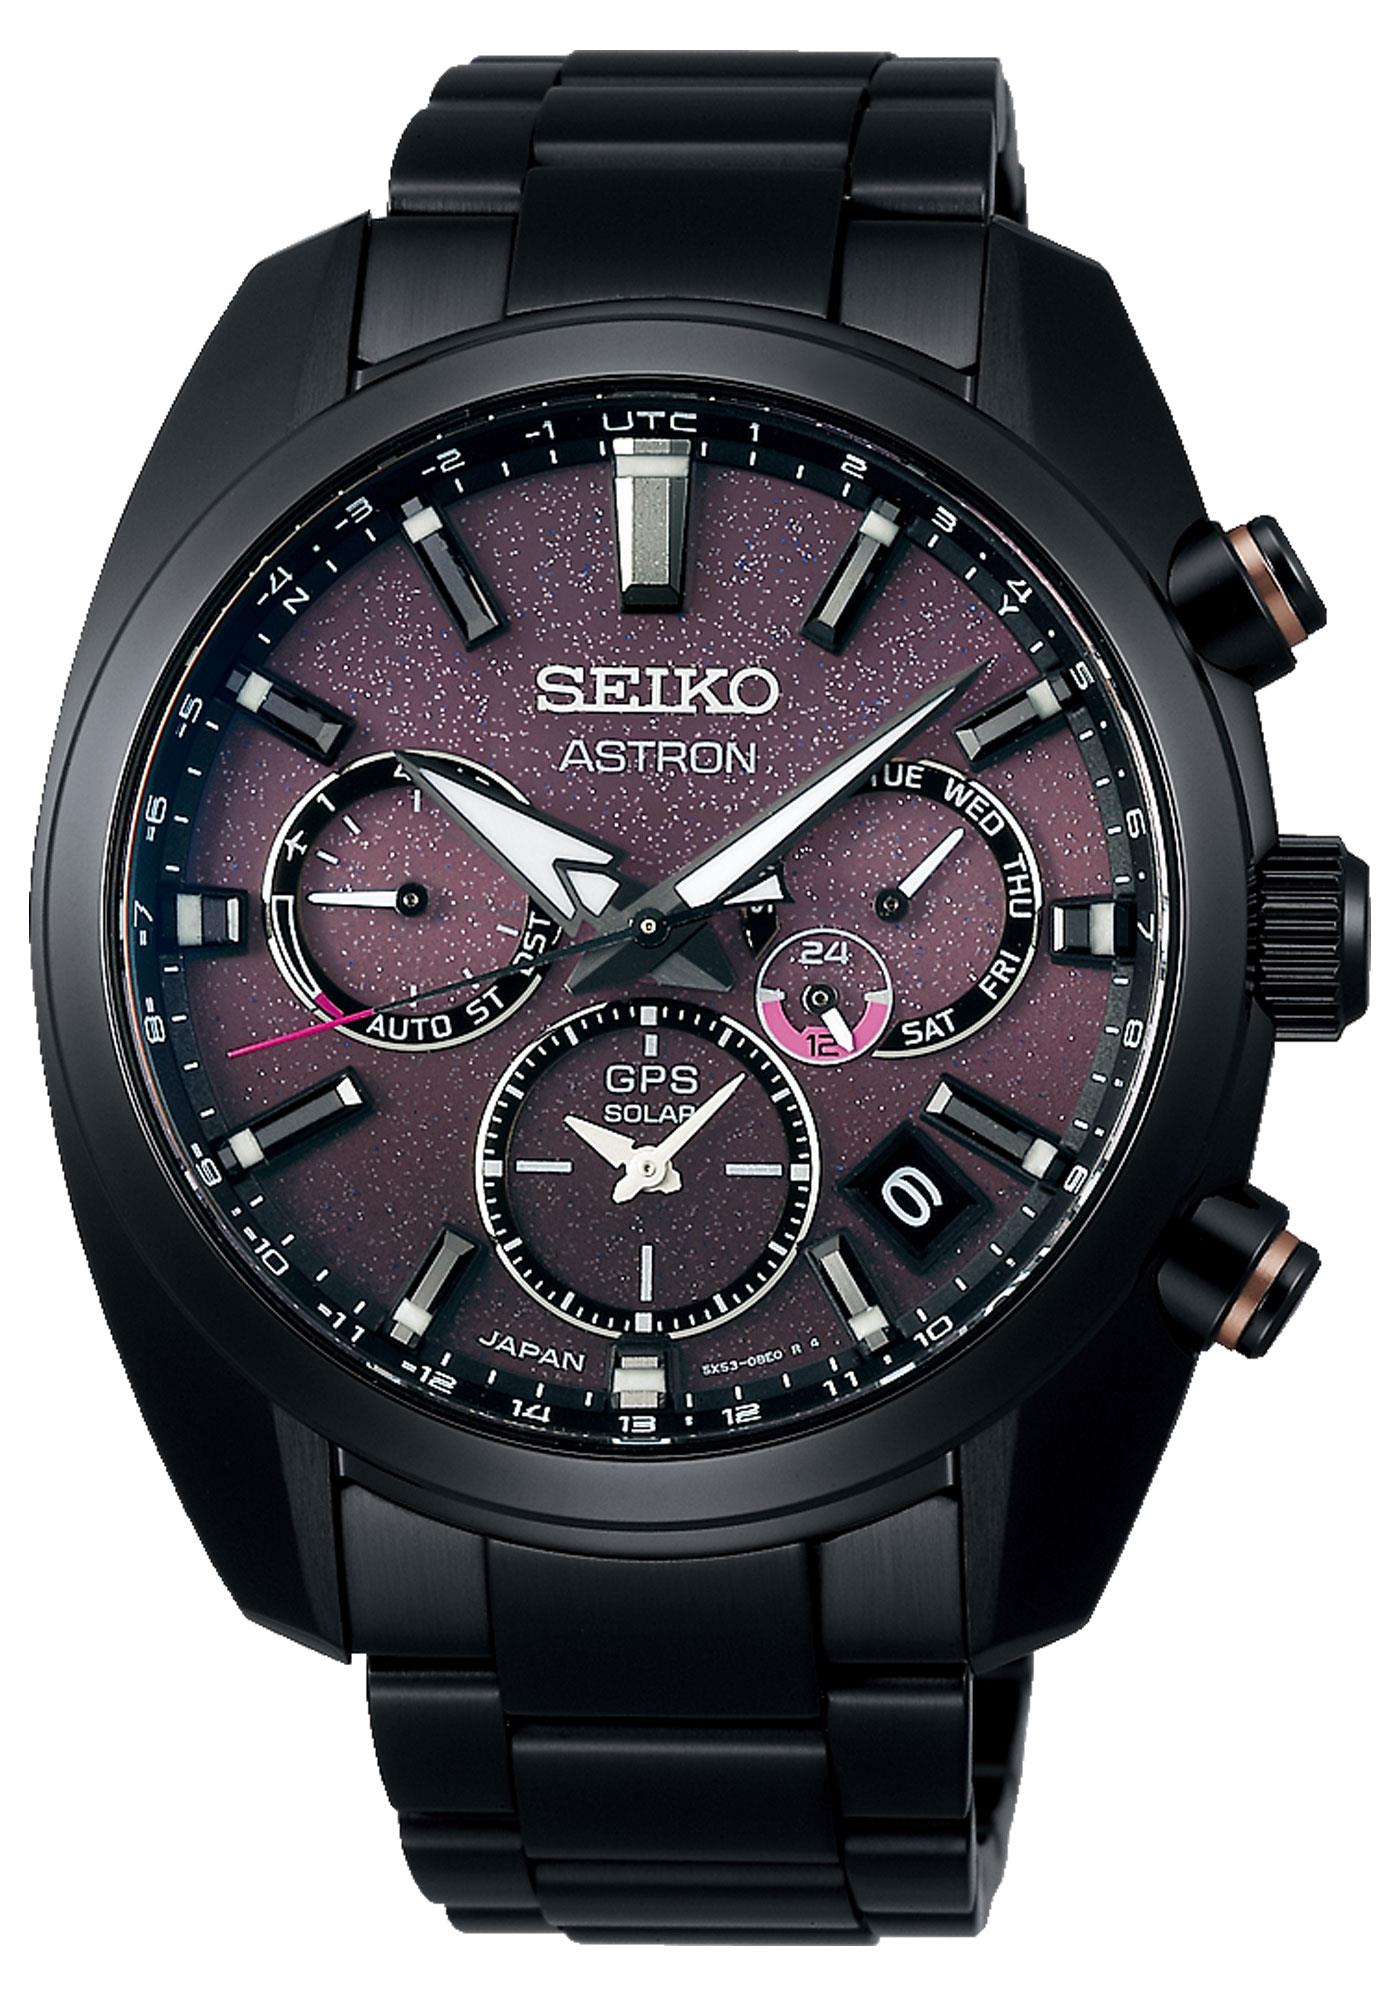 Seiko Astron Limited Edition Of 1,500 Pieces - Tempus Jewellery